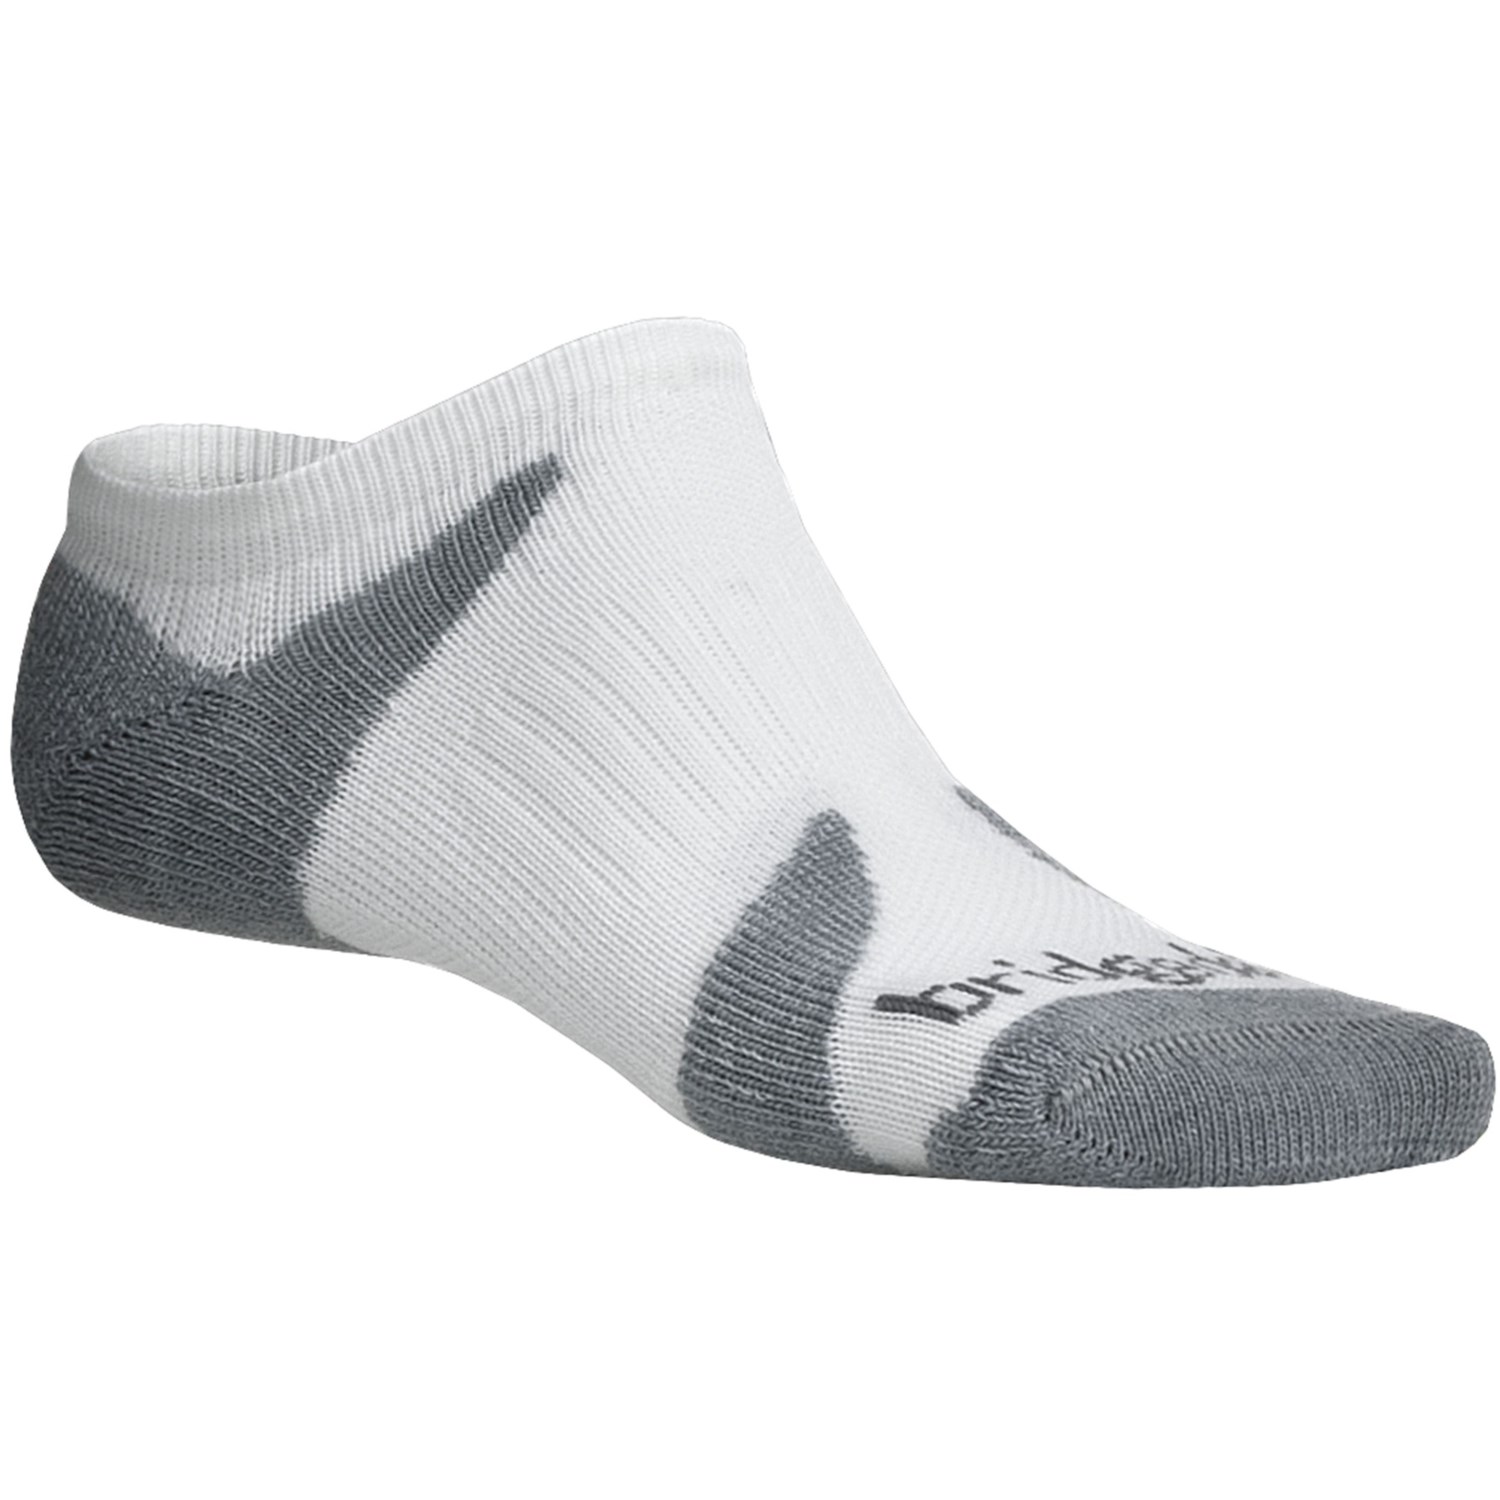 Bridgedale Xhale Cool Socks (For Men and Women) - Save 35%